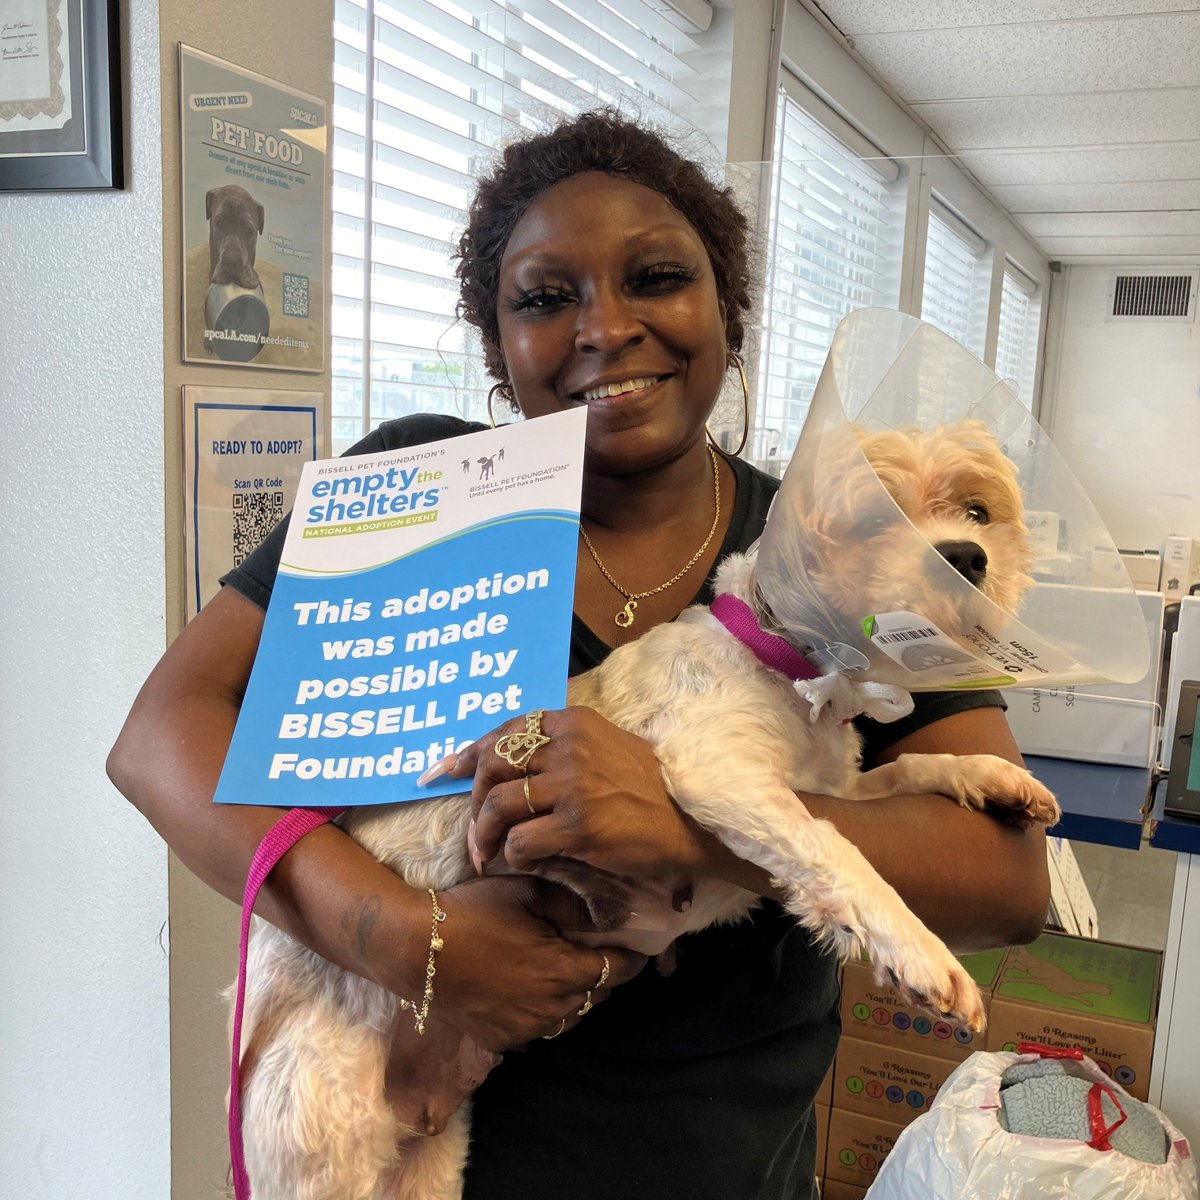 Jelly is going home! This adoption made in part by @bissellpetfoundation @cathy_bissell

Just ONE MORE DAY to adopt during #EmptyTheSheters! $50 dog adoption fees, $20 adoption fees for cats & kittens. Details t.ly/Z8GRu

#FriendsForLife #HappyAdoption #AdoptDontShop